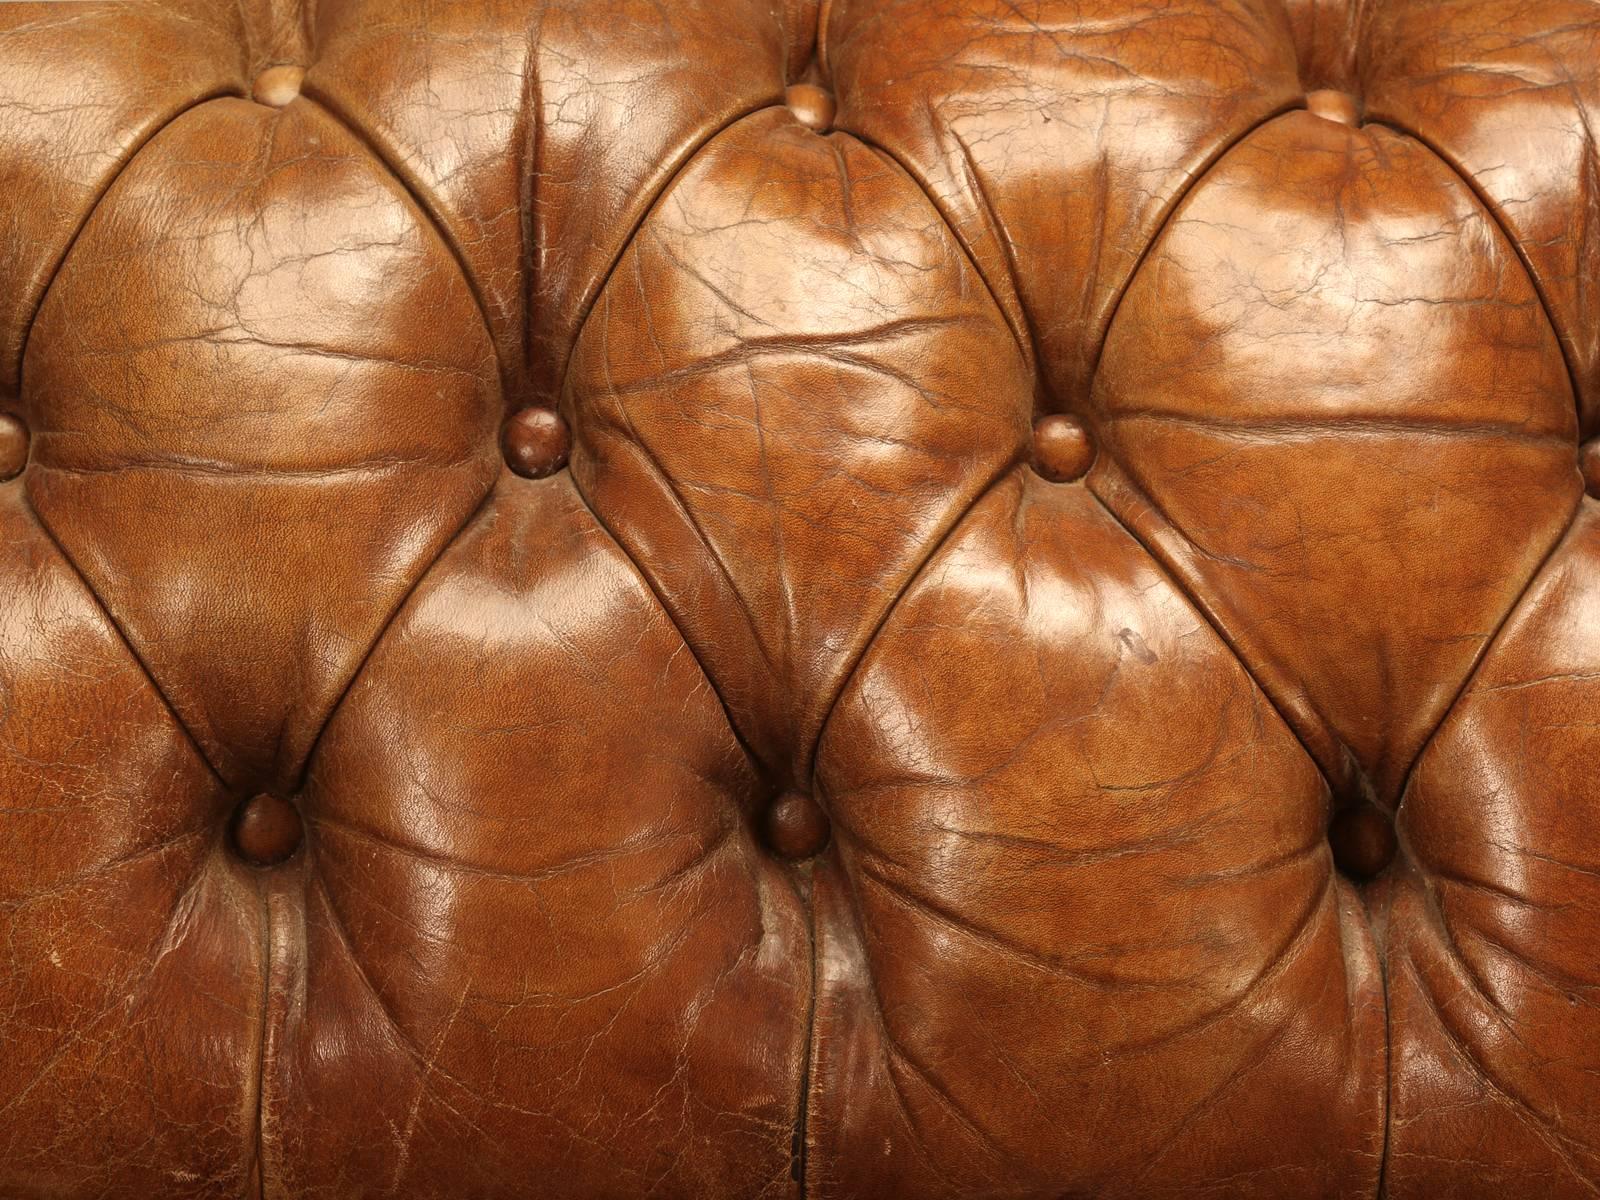 One of the nicest true antique (over 100 years old) unrestored leather Chesterfield sofas we have every owned. And the best thing about it is, that no one tried to restore the sofa, or re-dye the leather. This is the look that every manufacturer